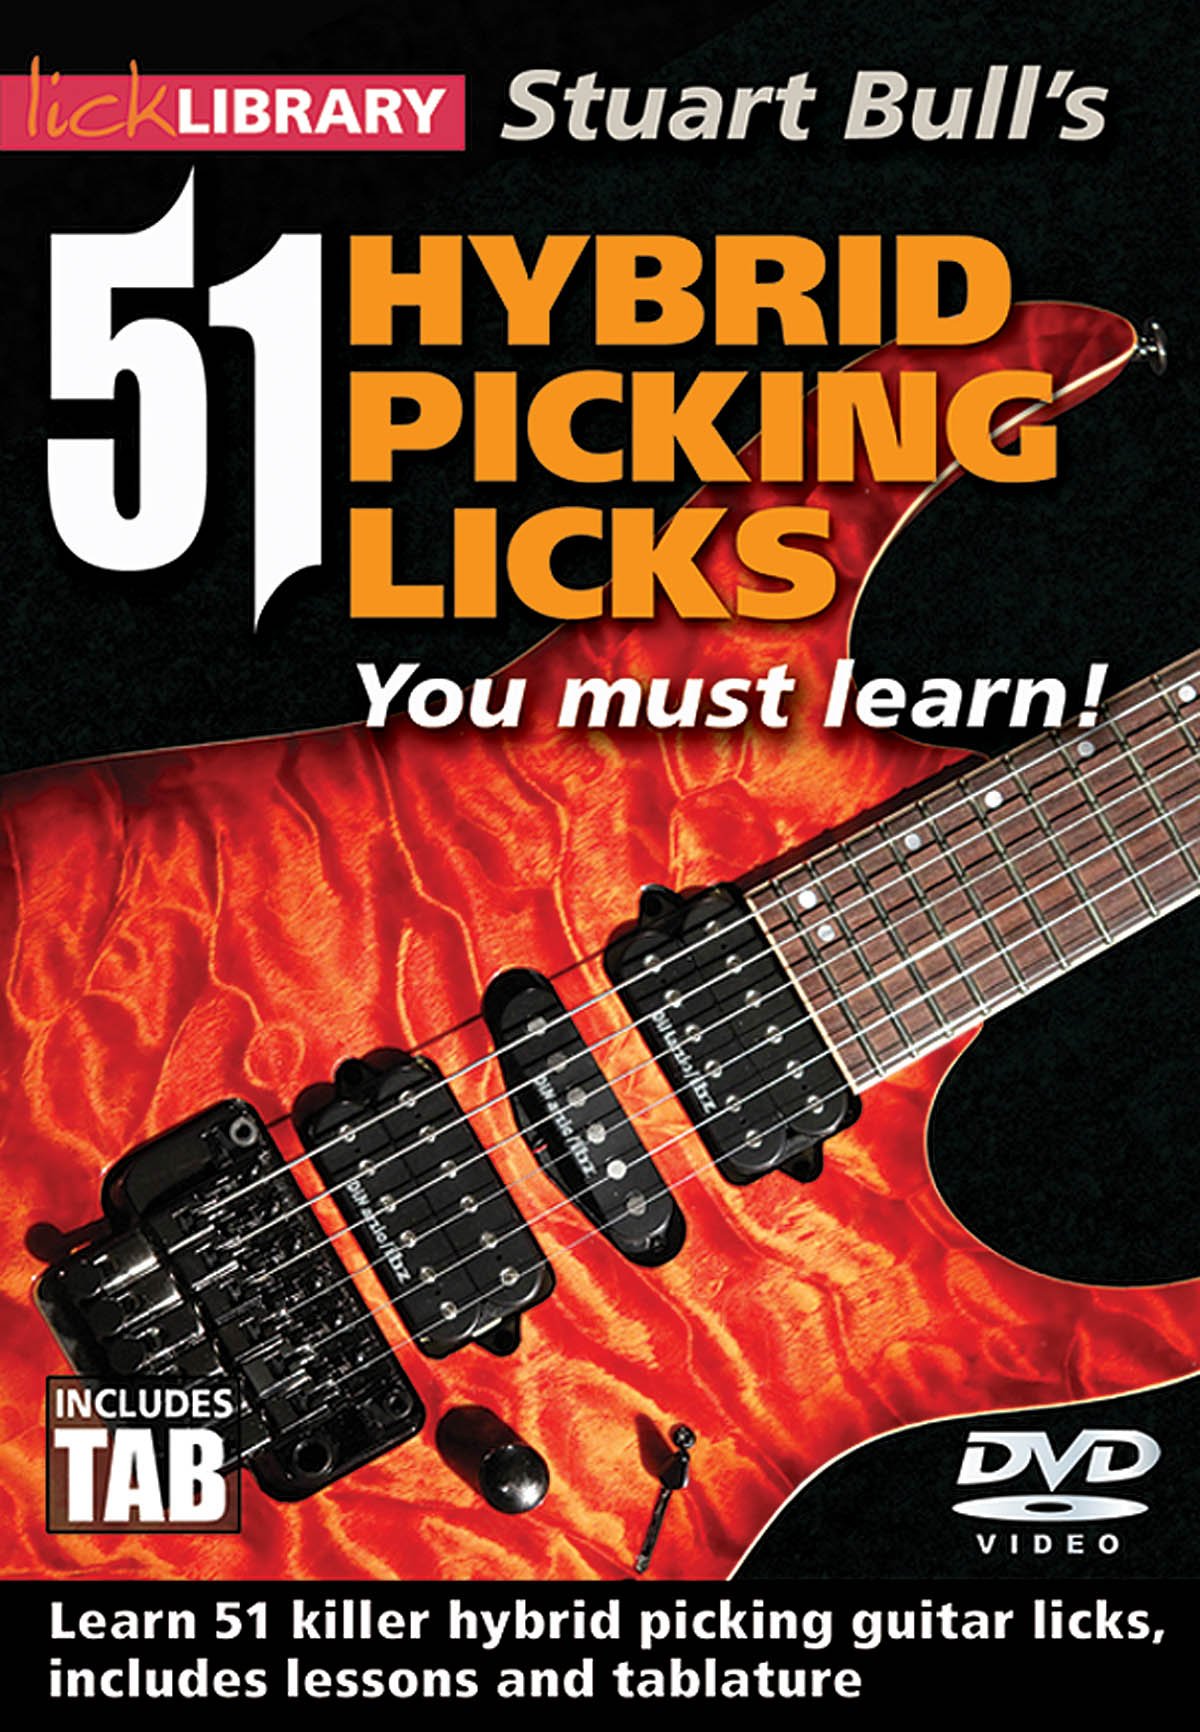 51 Hybrid Picking Licks You Must Learn: Guitar Solo: DVD